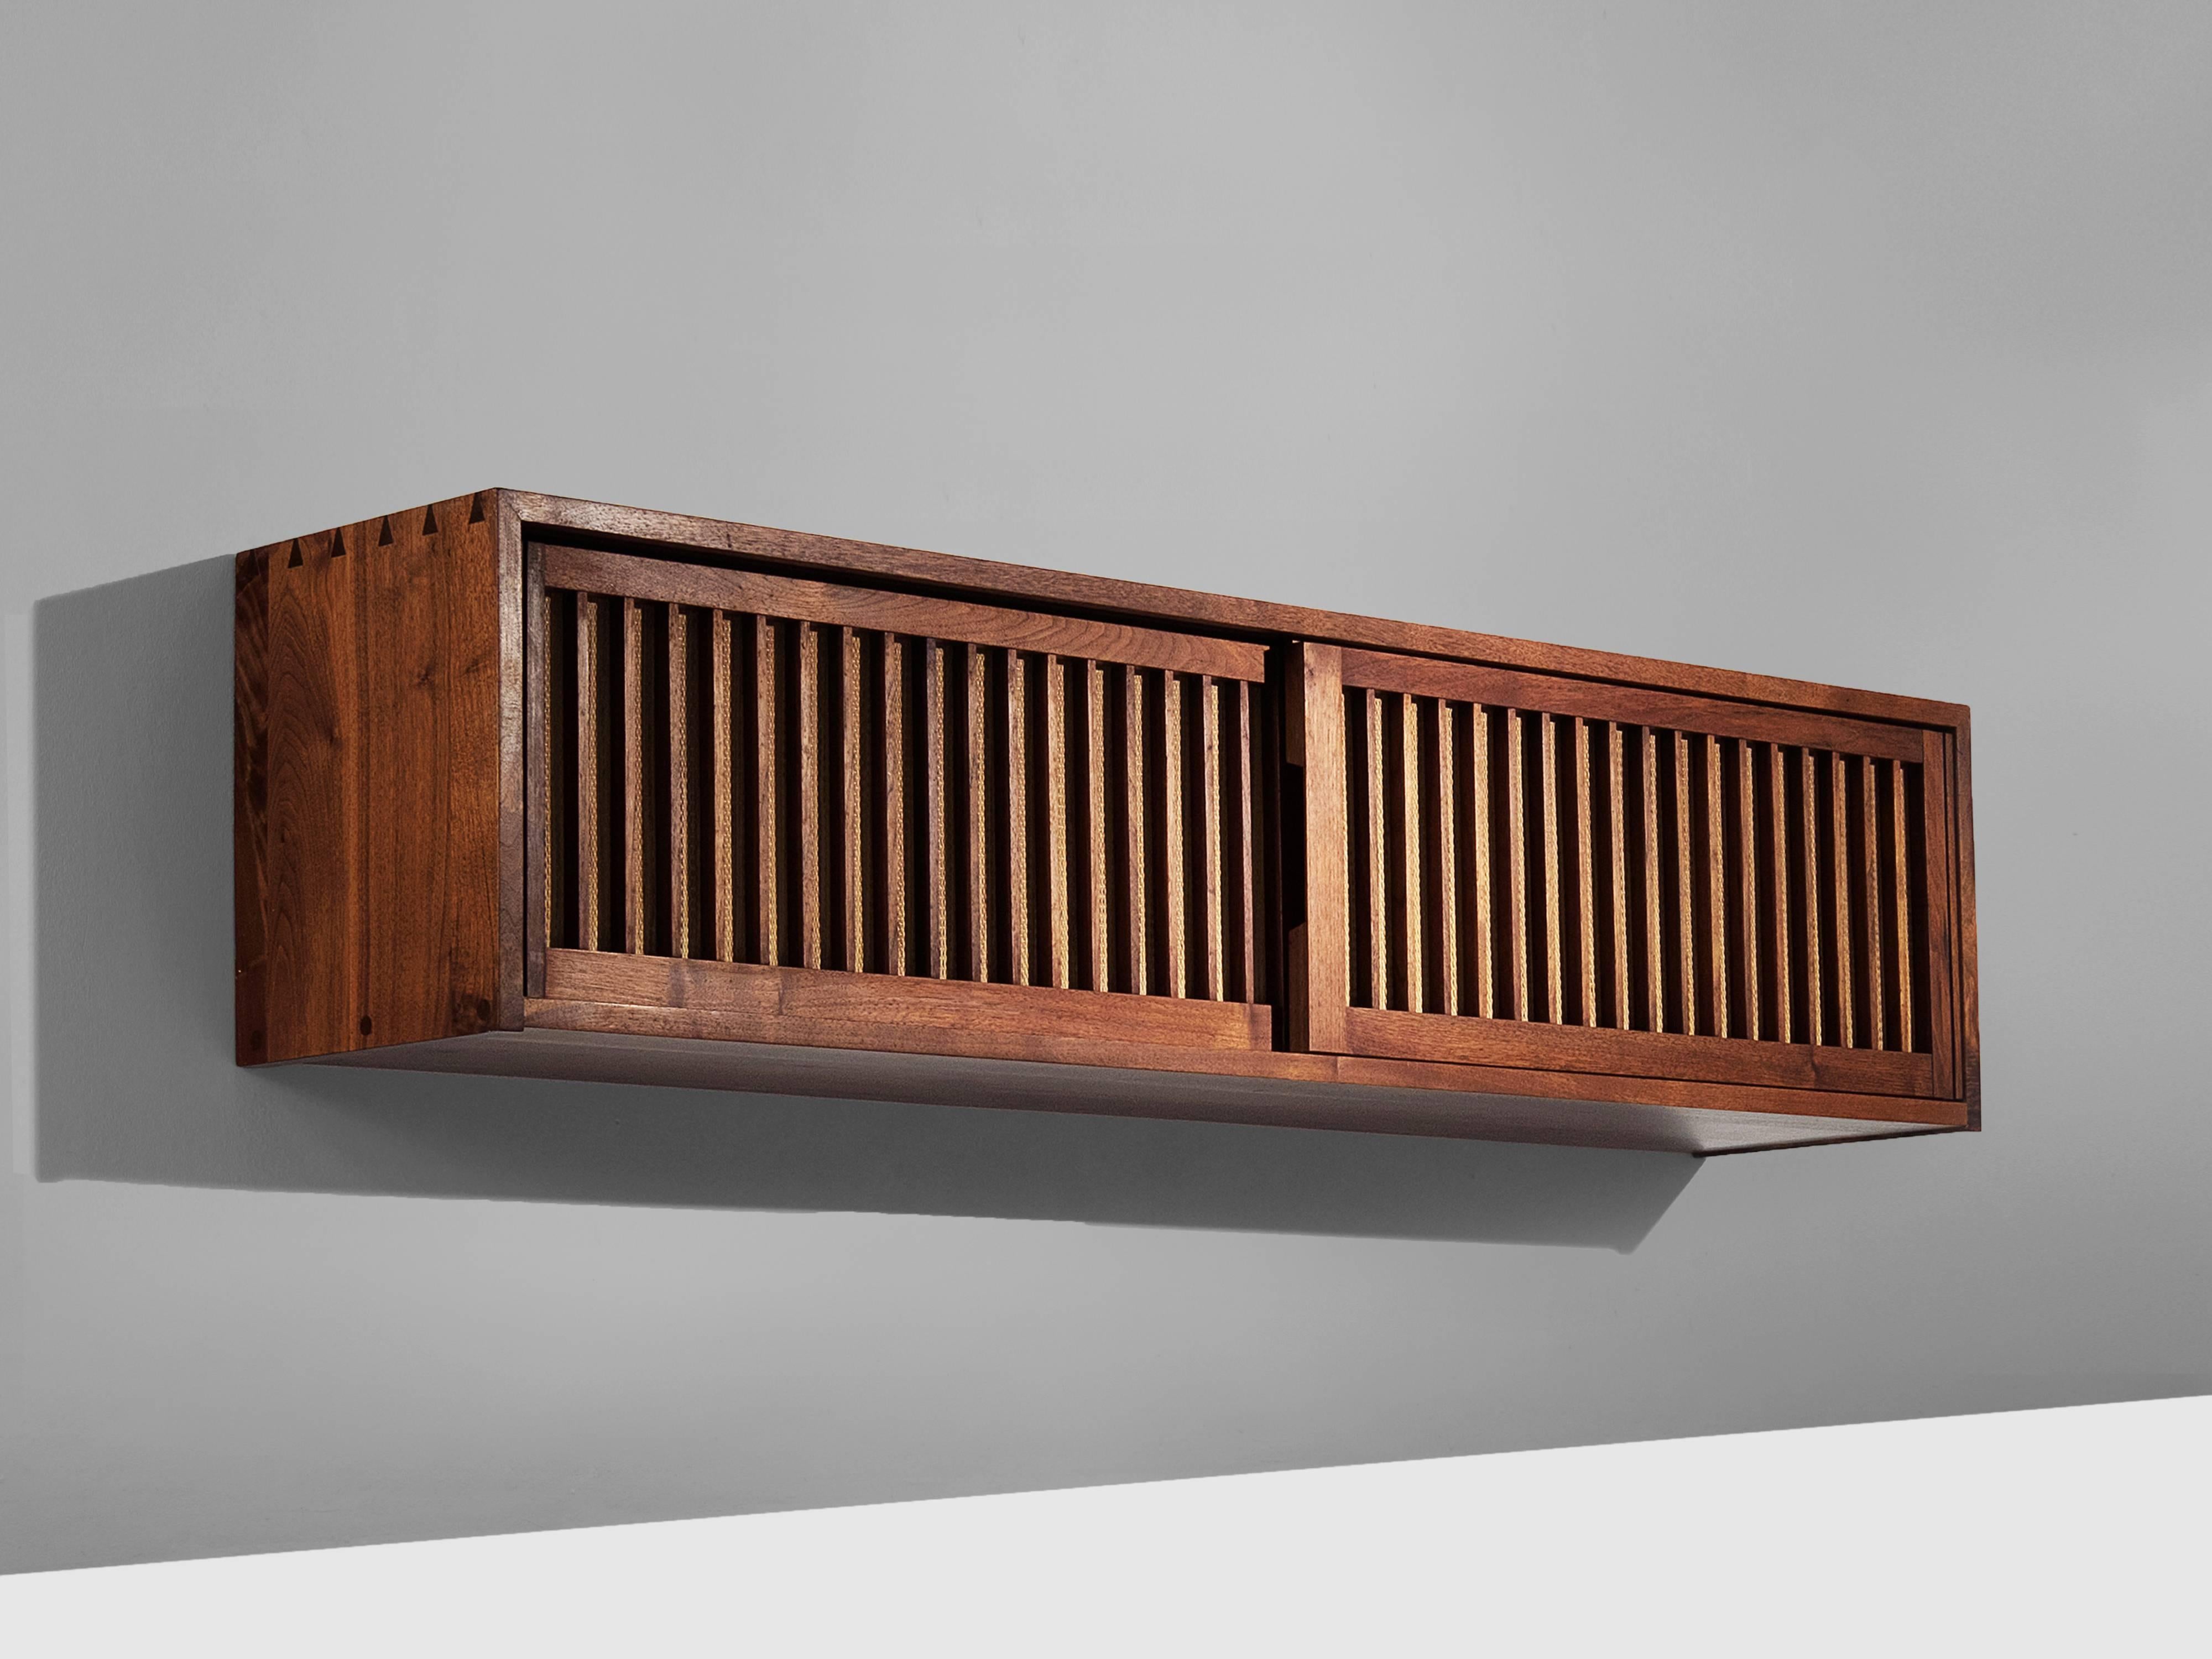 Cabinet, in walnut, oak and pandanus, by George Nakashima, United States 1960s. 

Exceptional cabinet by master woodworker George Nakashima. This wall-mounted case has two spindle sliding doors with pandanus cloth. The cabinet shows the great